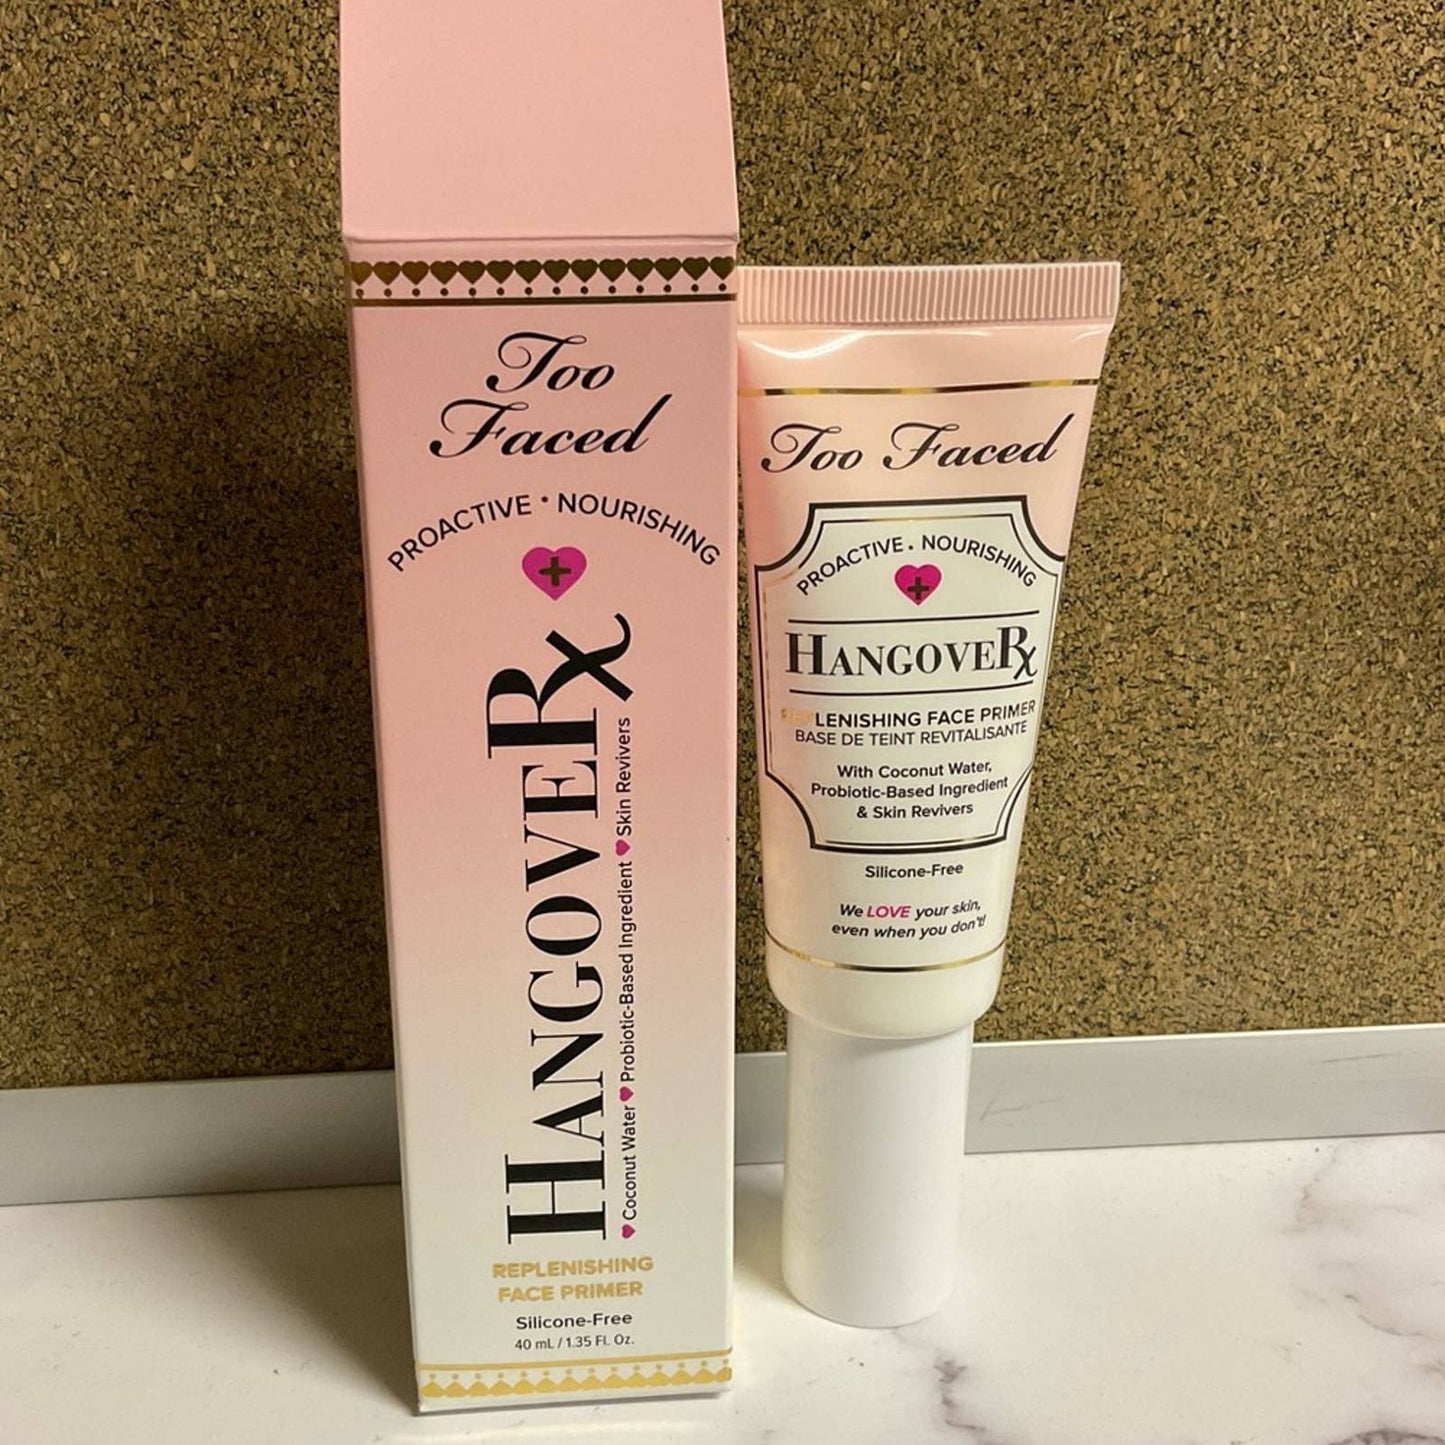 Too Faced Hangover Rx Replenishing Primer